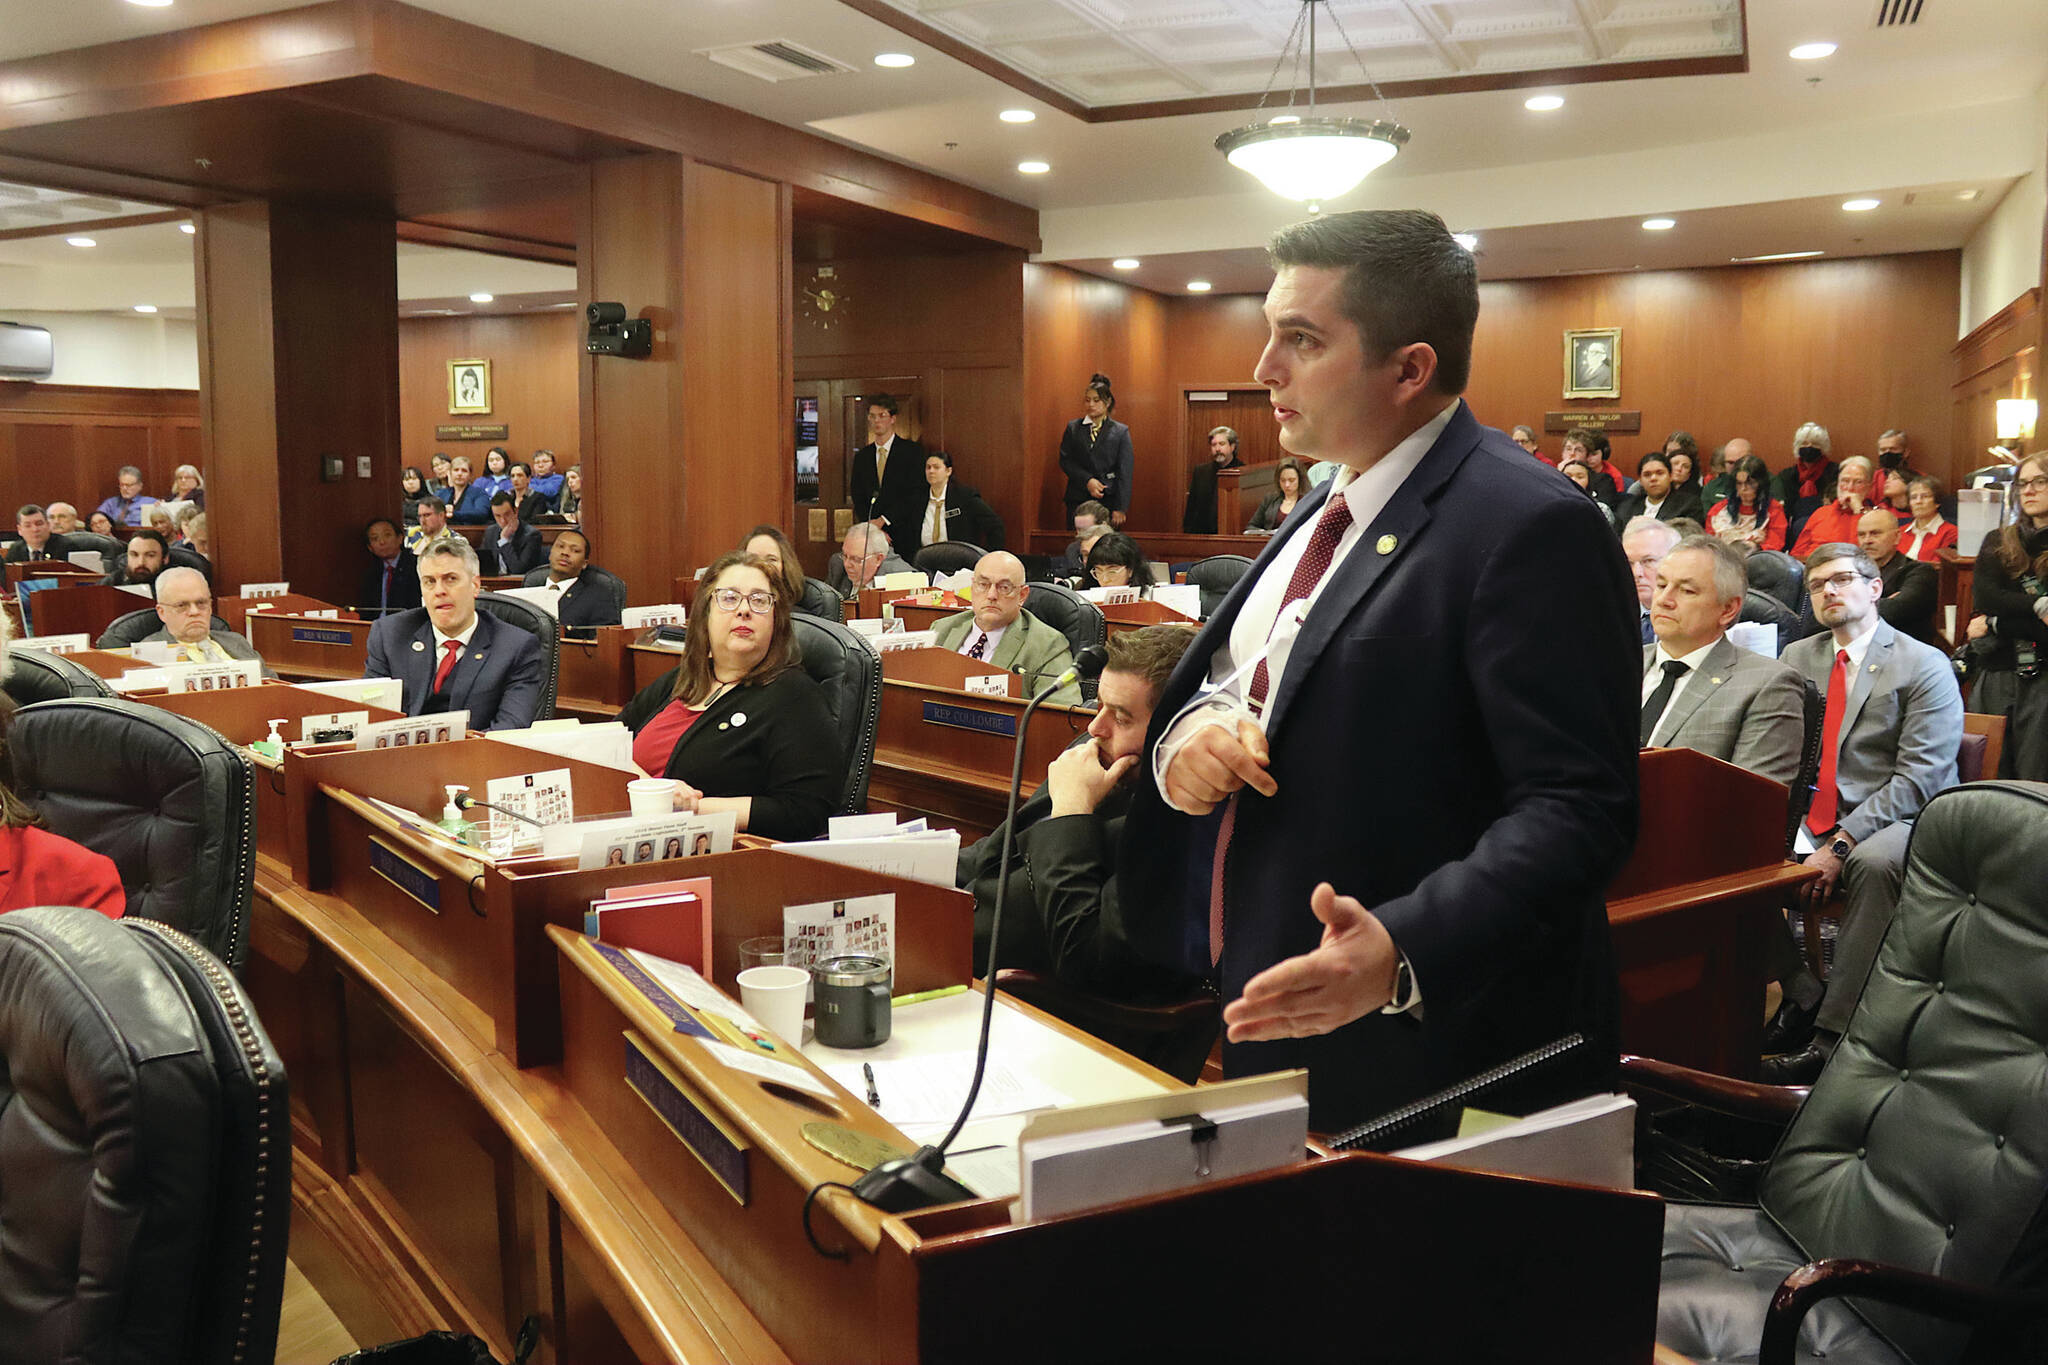 Rep. Justin Ruffridge, a Soldotna Republican who co-chairs the House Education Committee, speaks in favor overriding a veto of Senate Bill 140 during floor debate of a joint session of the Alaska State Legislature on Monday. (Mark Sabbatini/Juneau Empire)